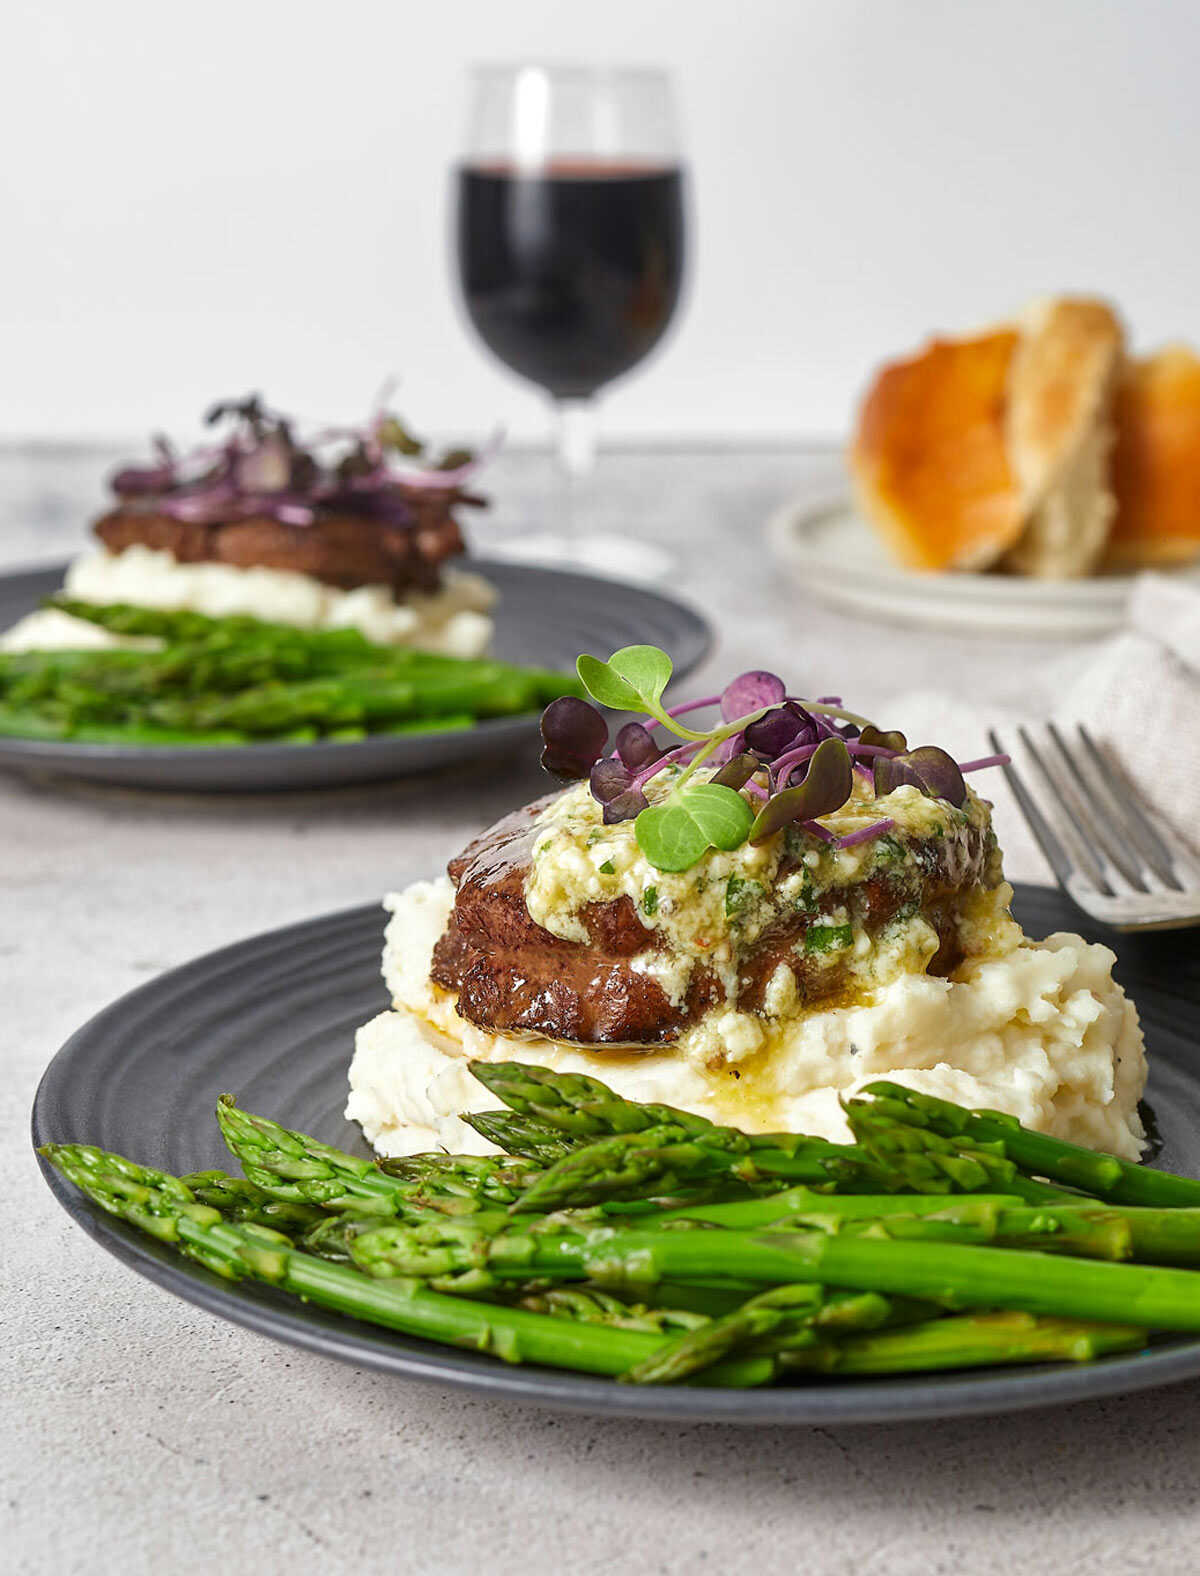 Filet mignon with gorganzola sauce on mashed potatoes with asparagus